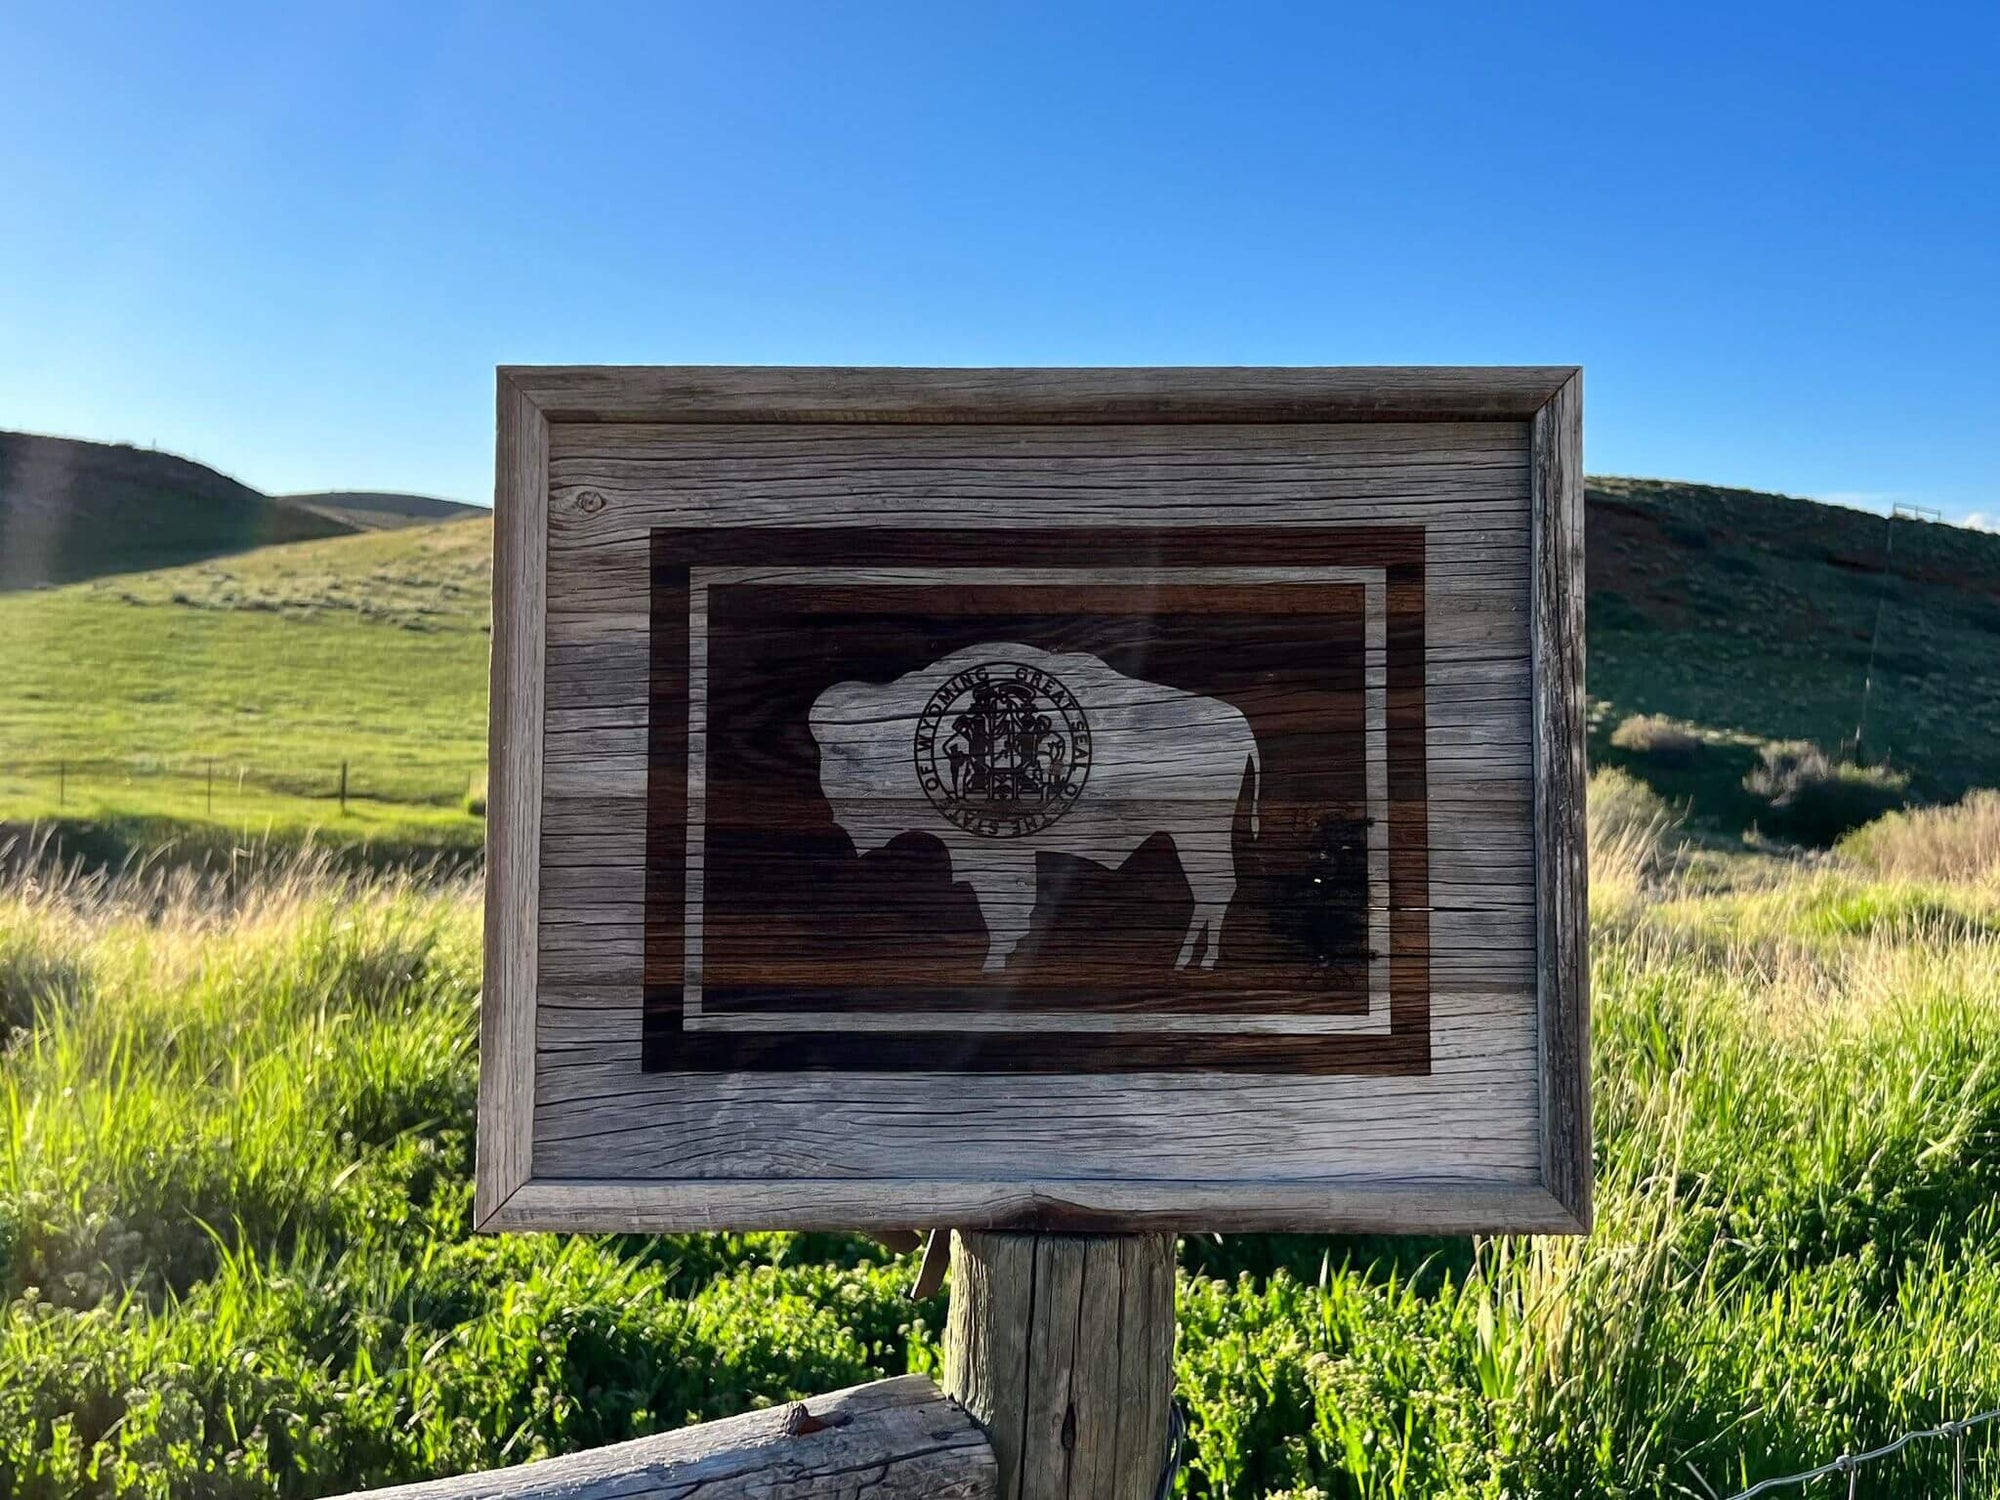 Wyoming Flag wall decor, made of rustic barnwood.  Size is 17" x 21", displayed in photo with Wyoming landscape in background